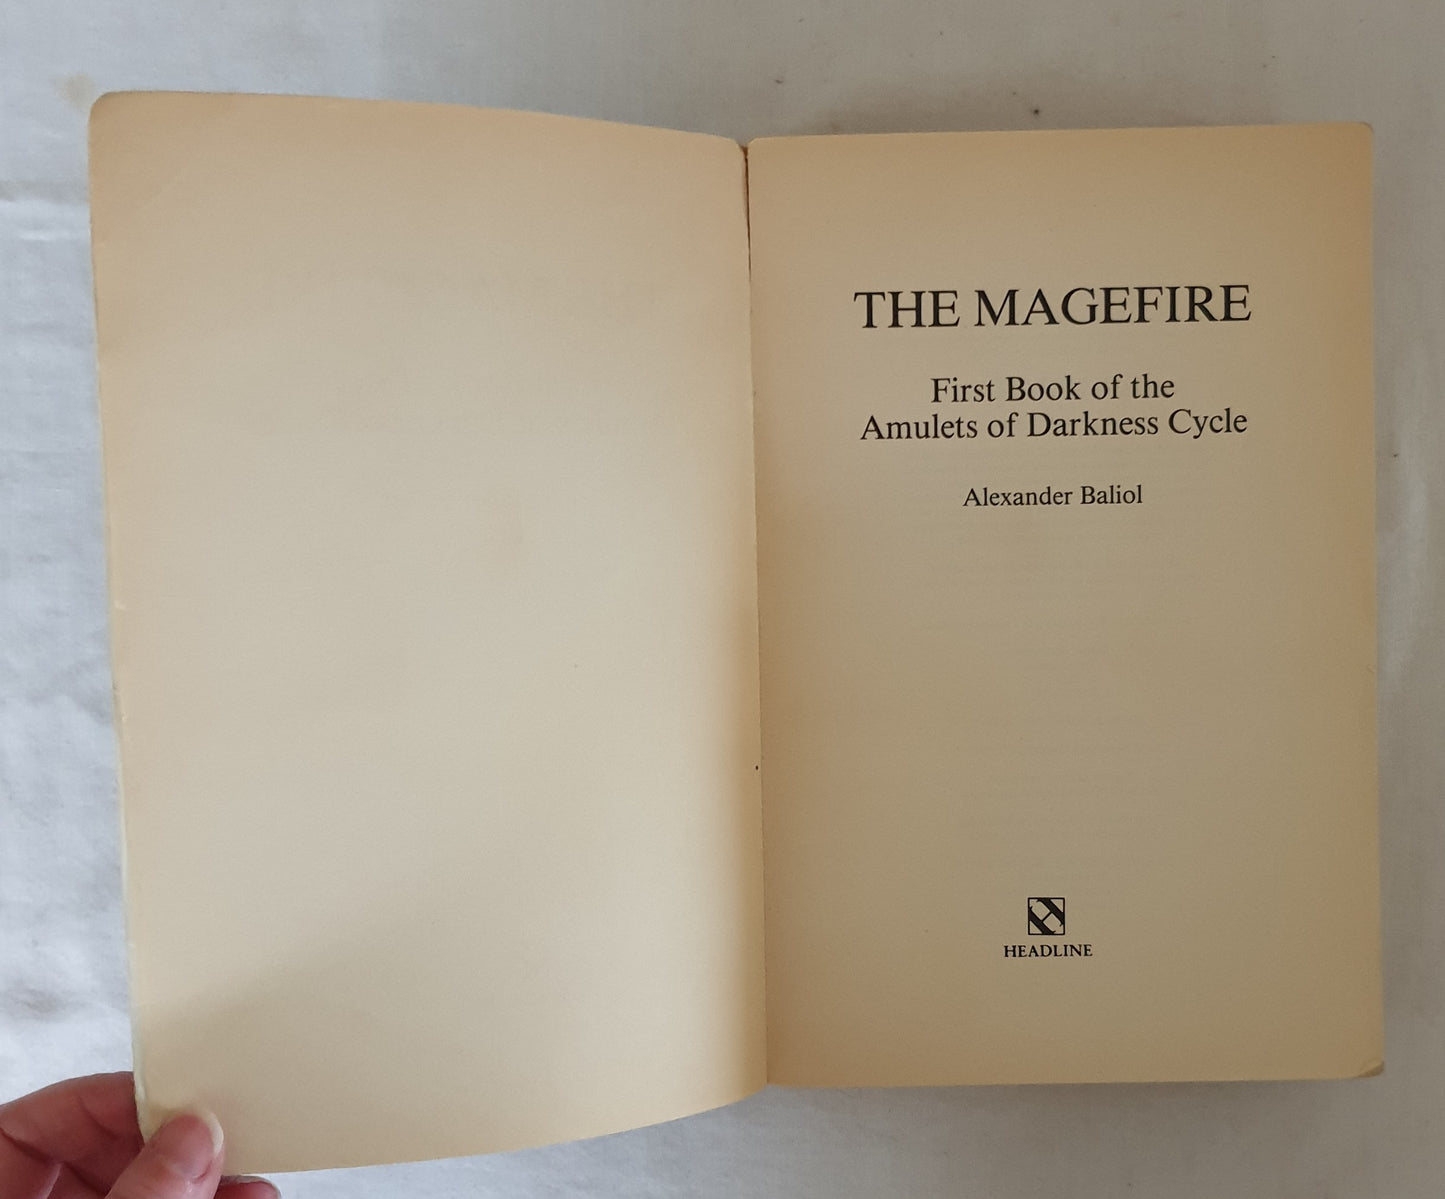 The Magefire by Alexander Baliol